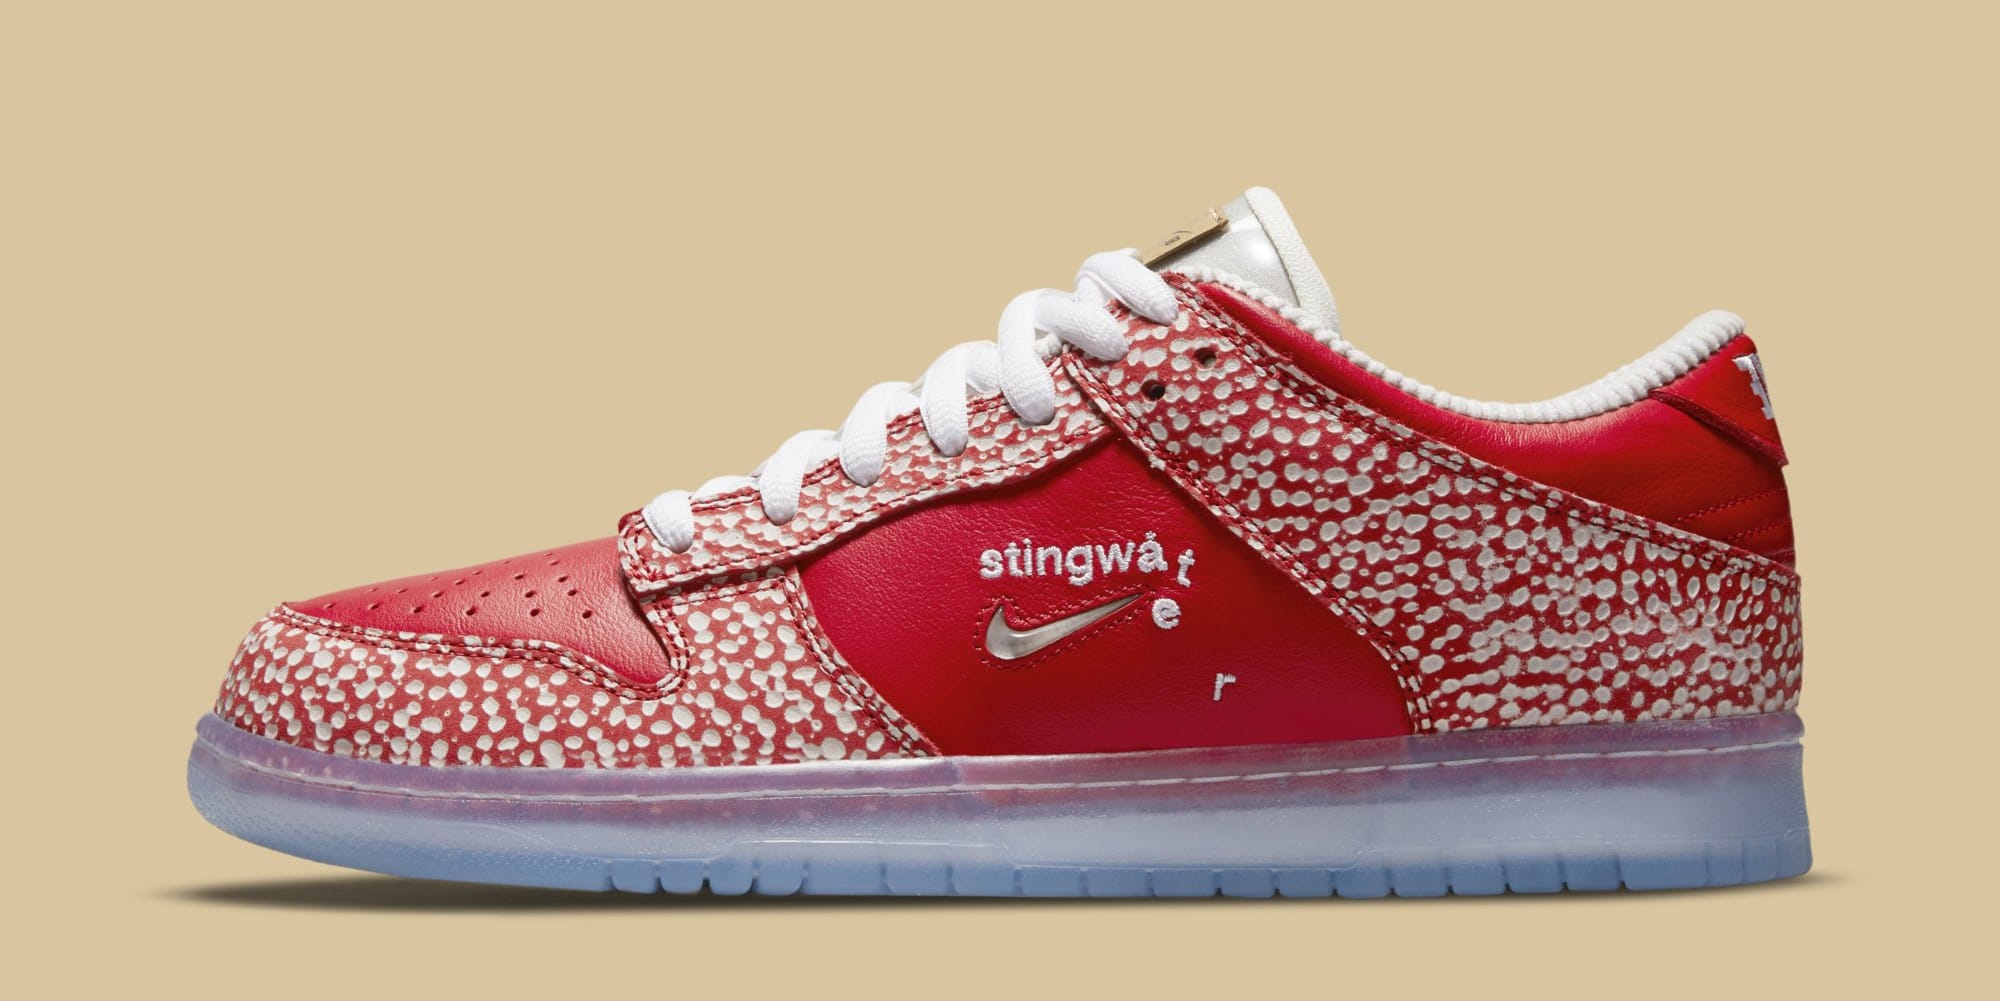 Stingwater x Nike SB Dunk Low DH7650-600 (Lateral)